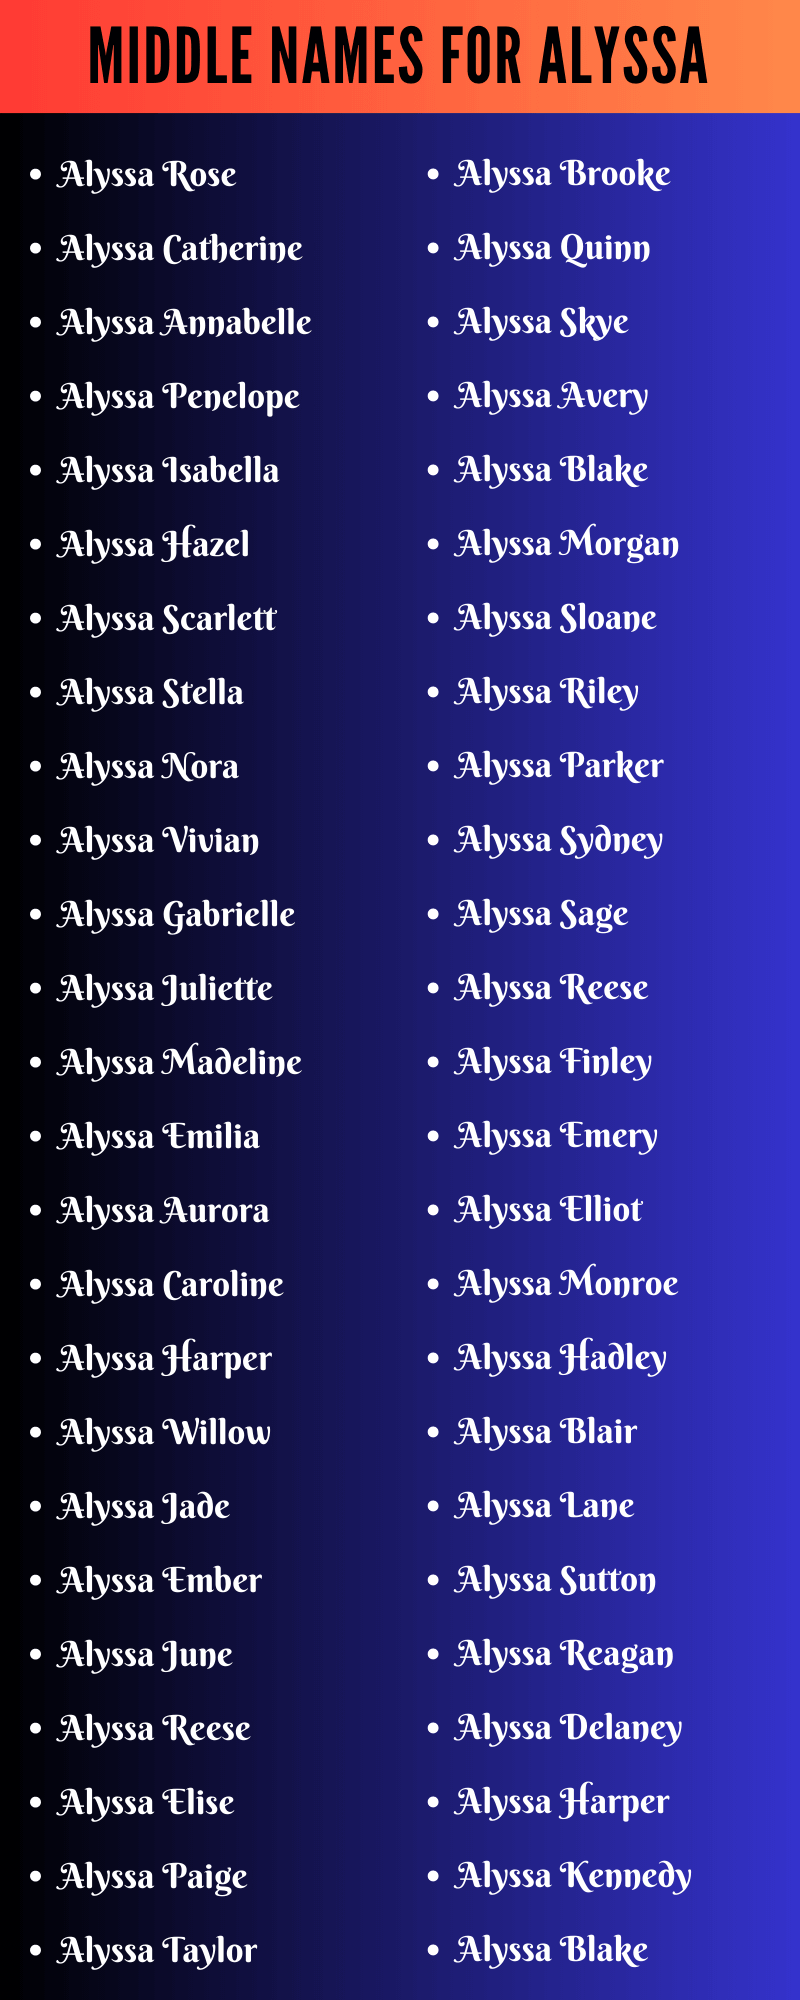 Middle Names For Alyssa